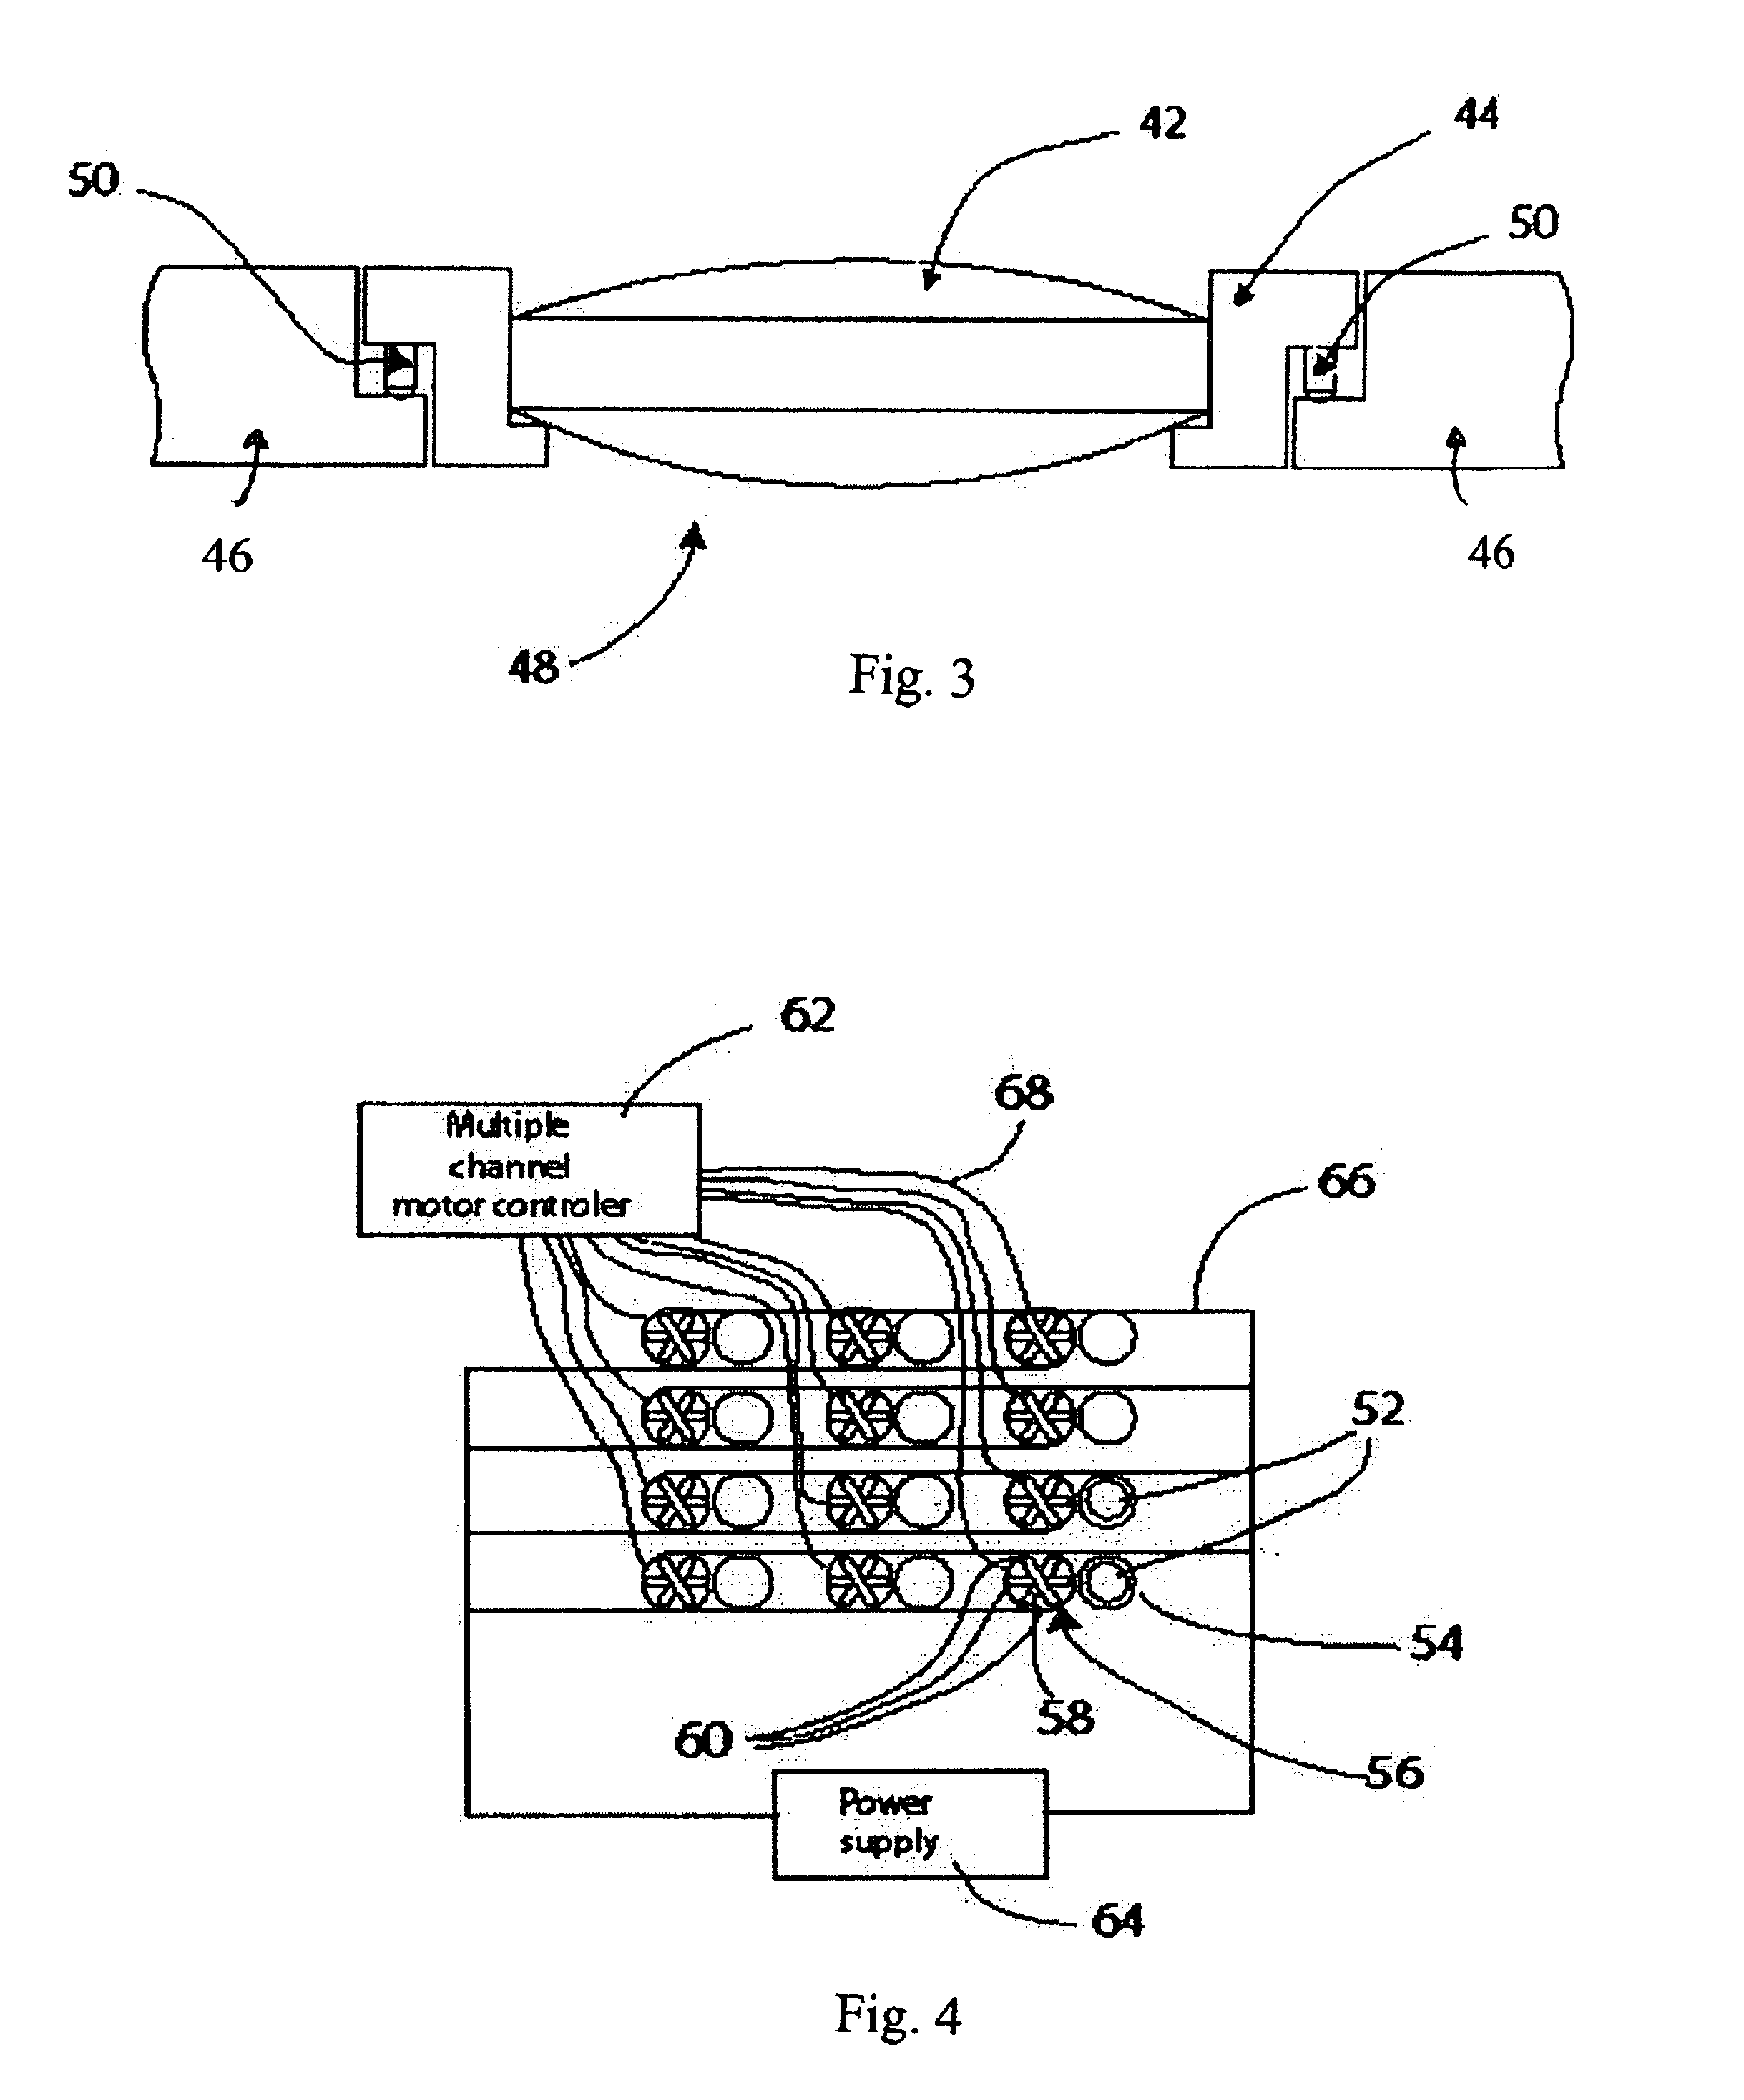 Multi-axis imaging system having individually-adjustable elements